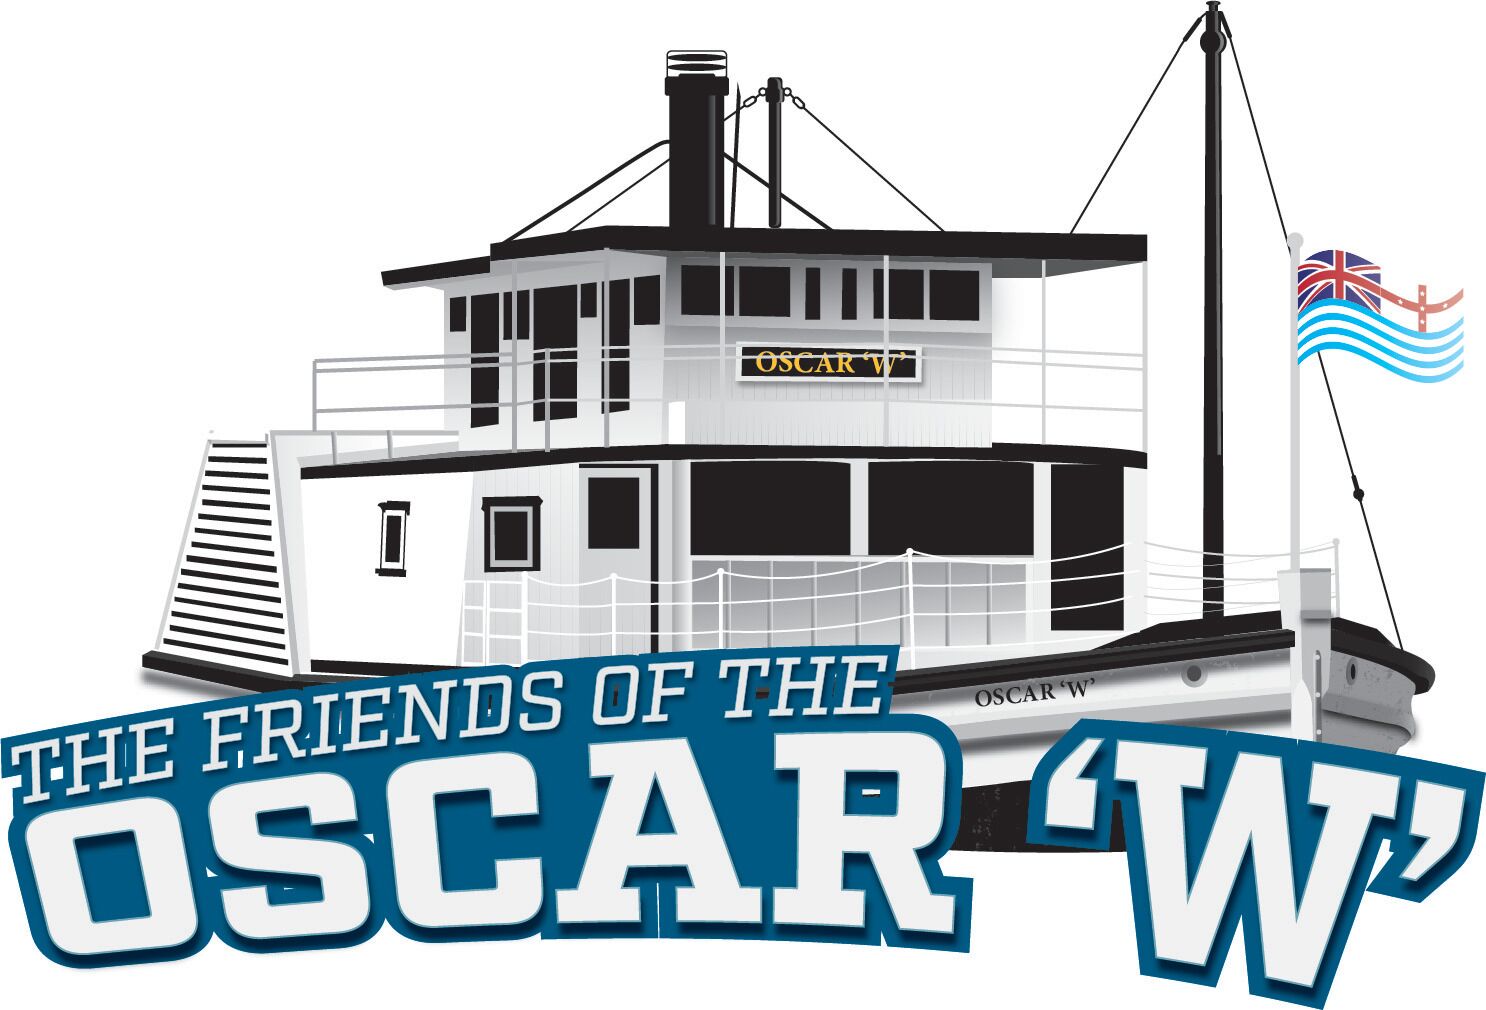 The Friends of the PS Oscar 'W'